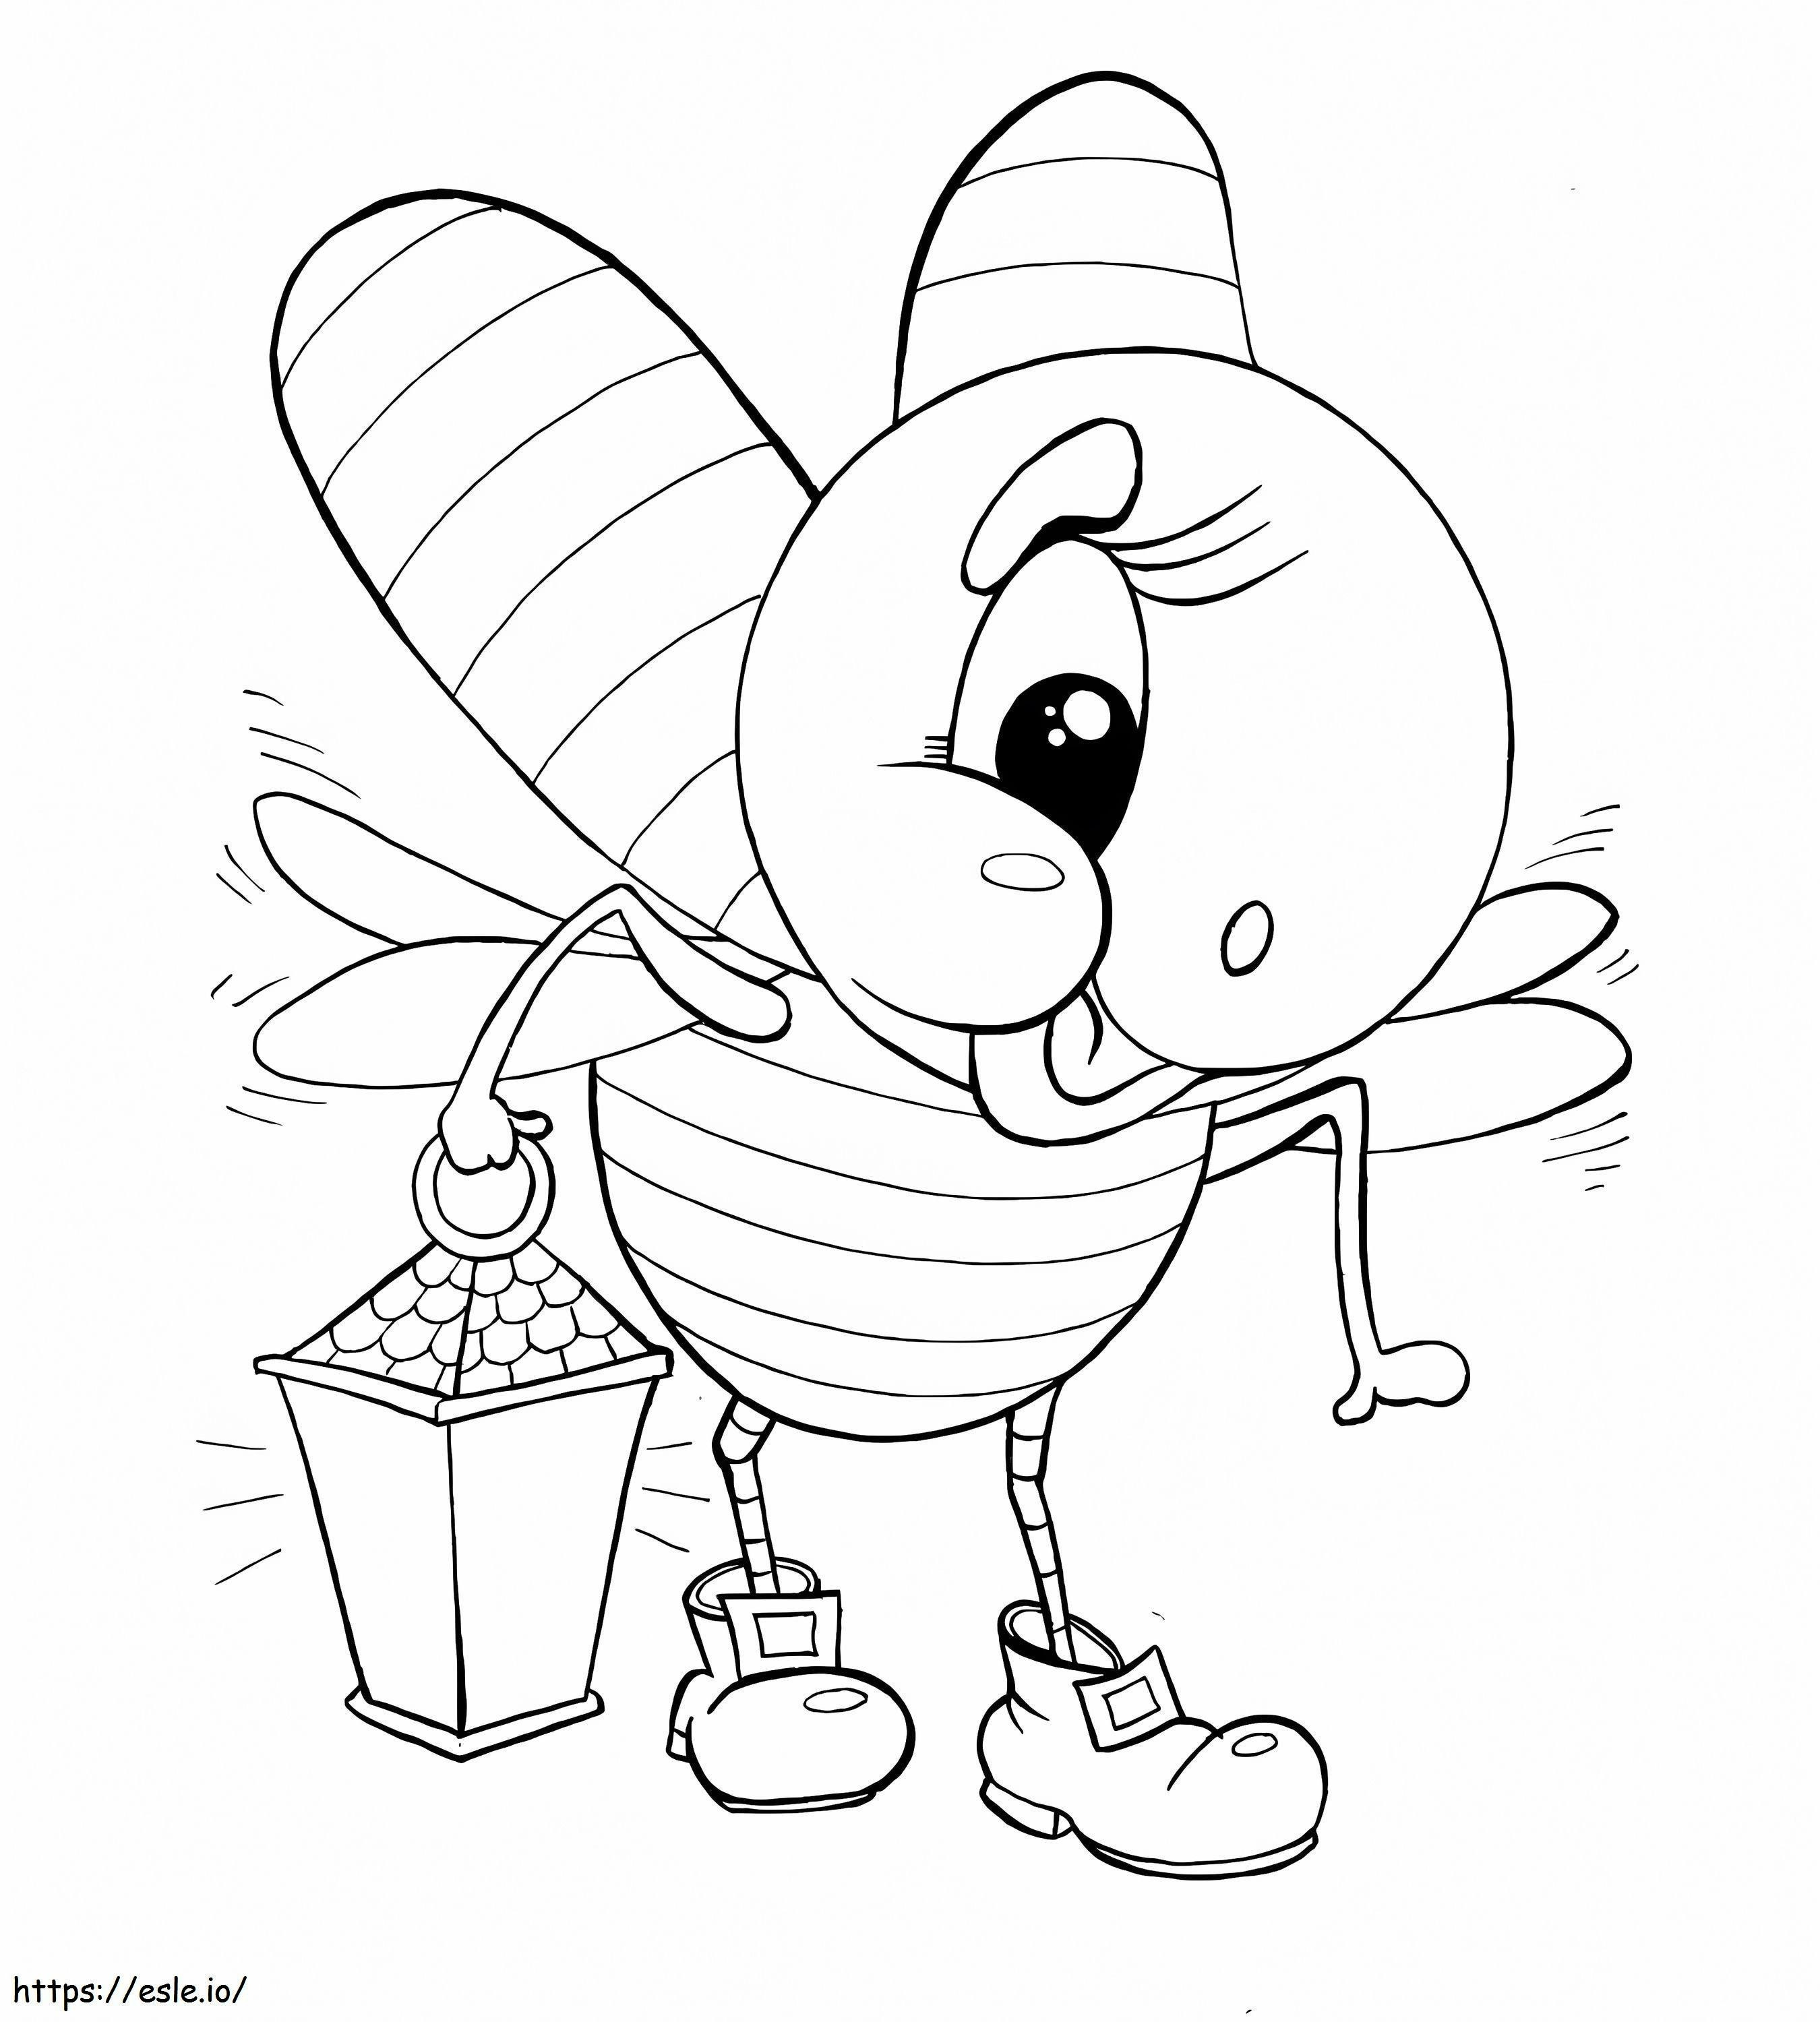 Little Firefly coloring page